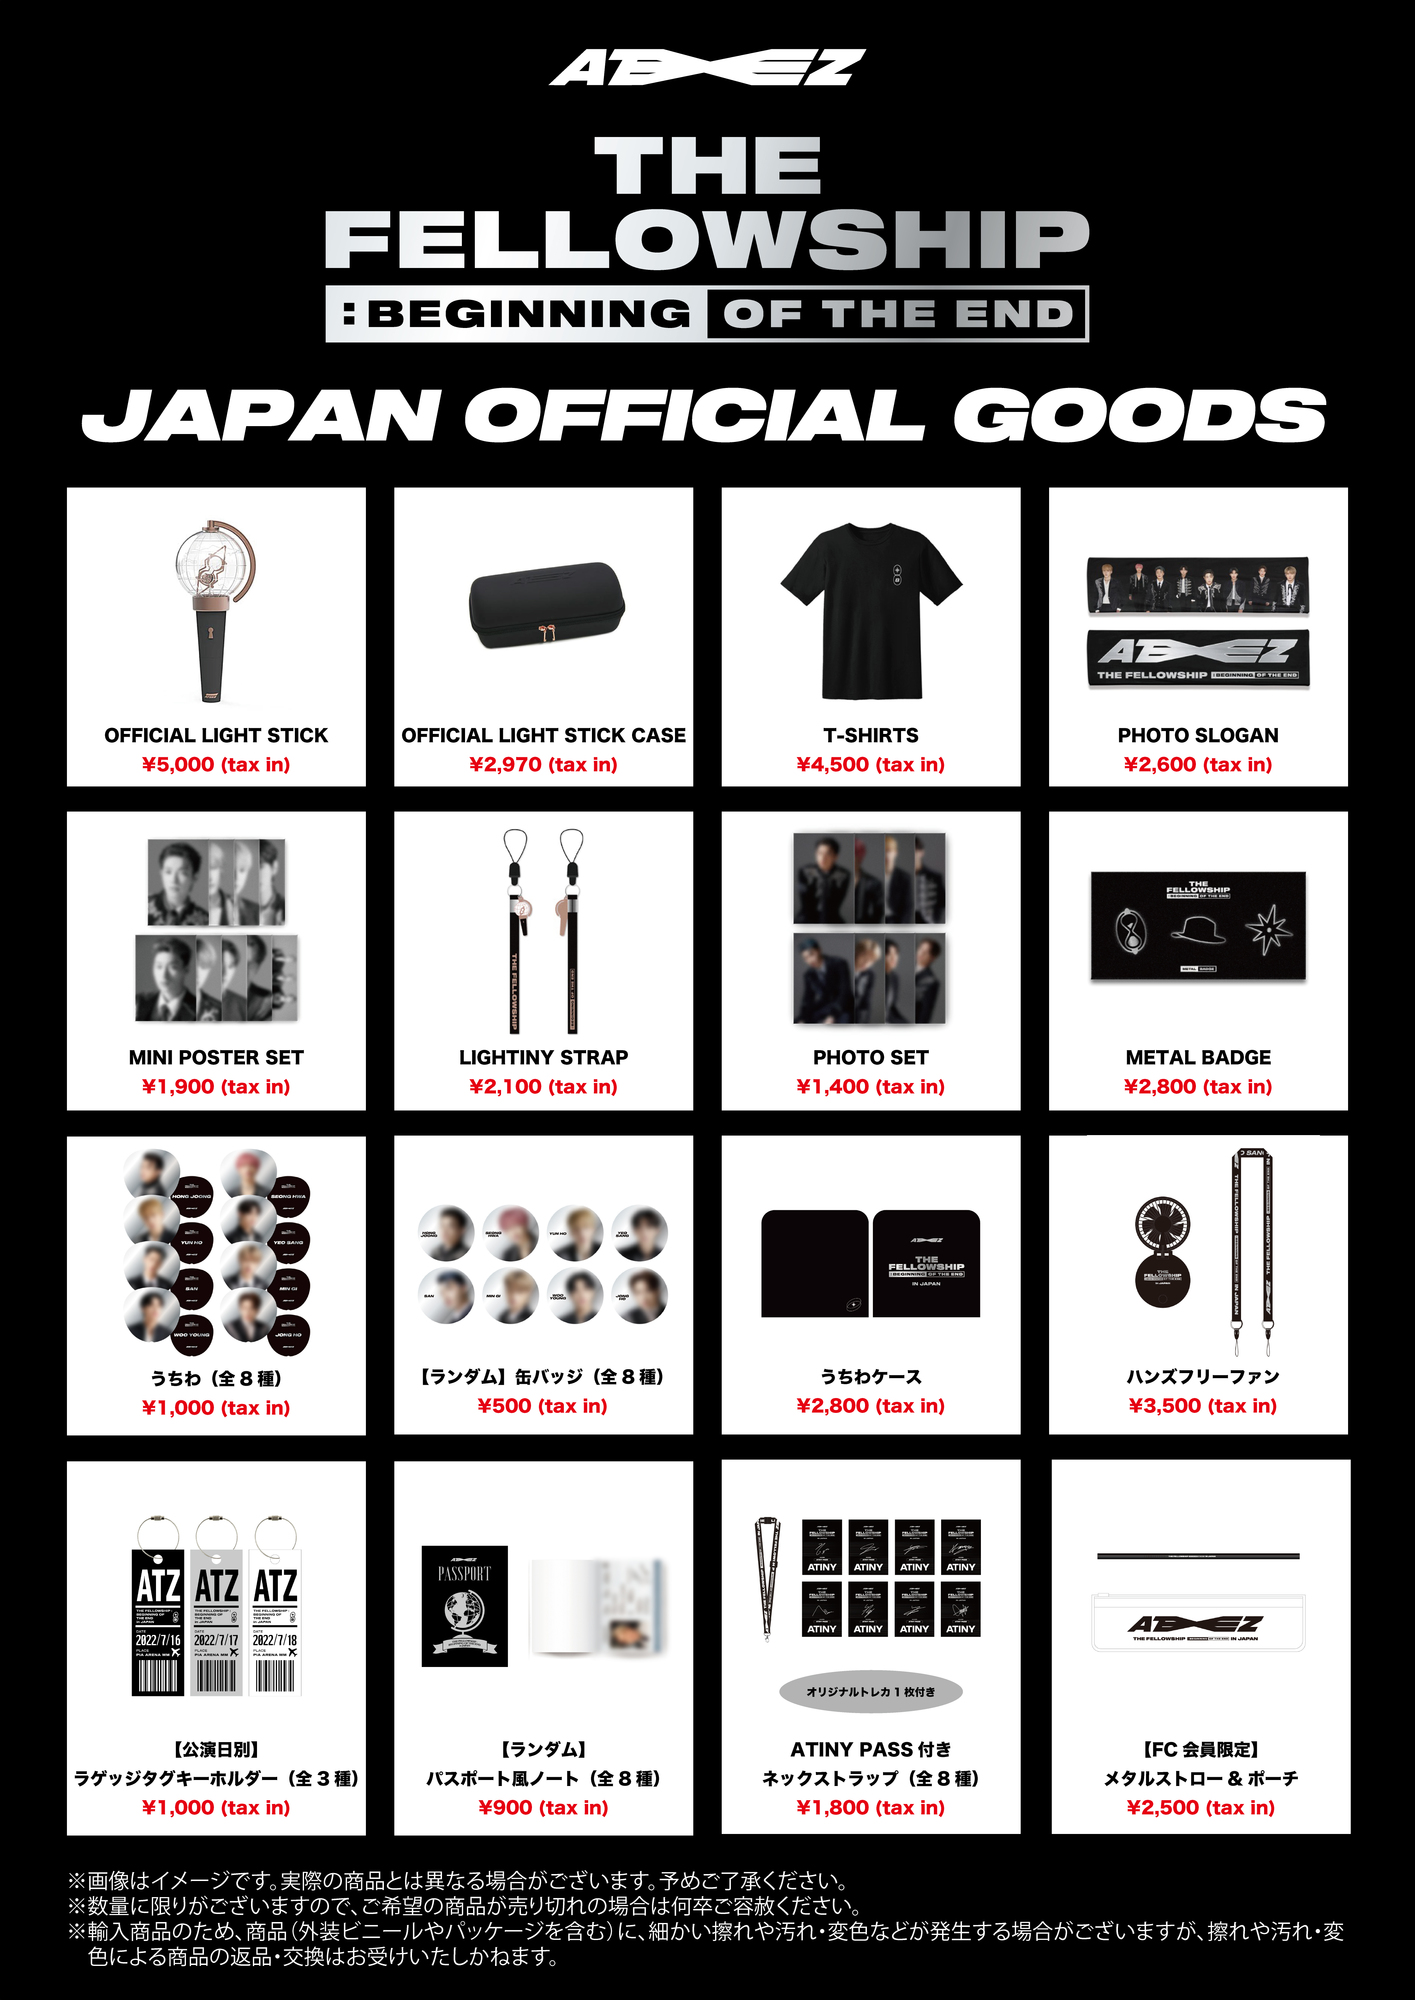 ATEEZ 2022 WORLD TOUR [THE FELLOWSHIP : BEGINNING OF THE END] in JAPAN  グッズオンライン販売開始！ | ATEEZ JAPAN OFFICIAL SITE